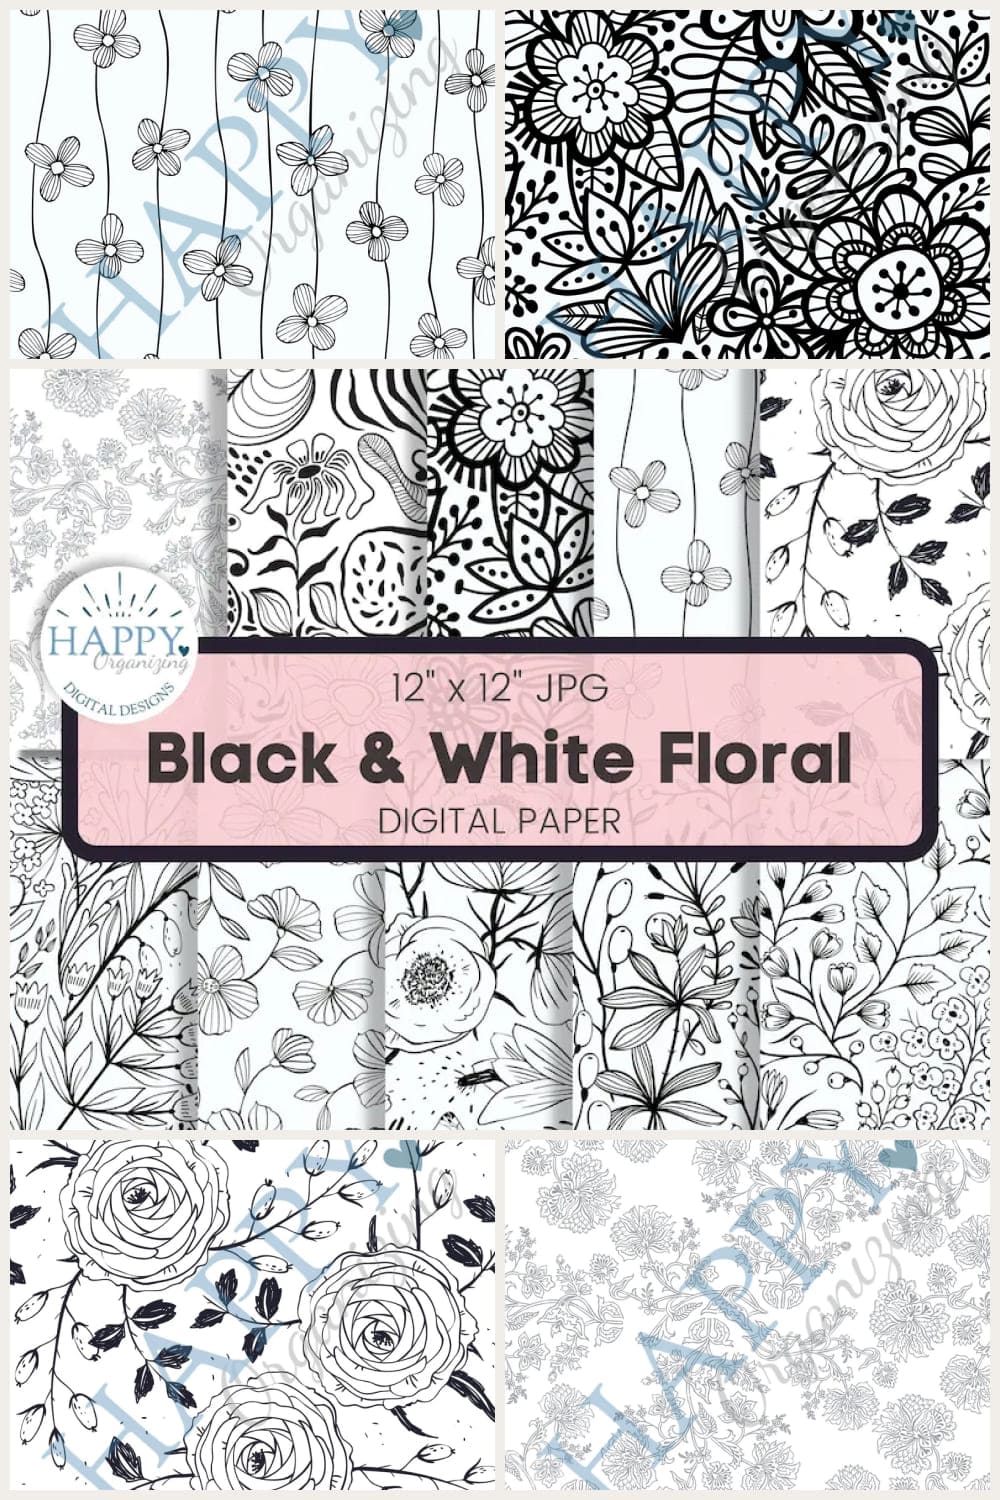 Collage with Black & White Floral Patterns.